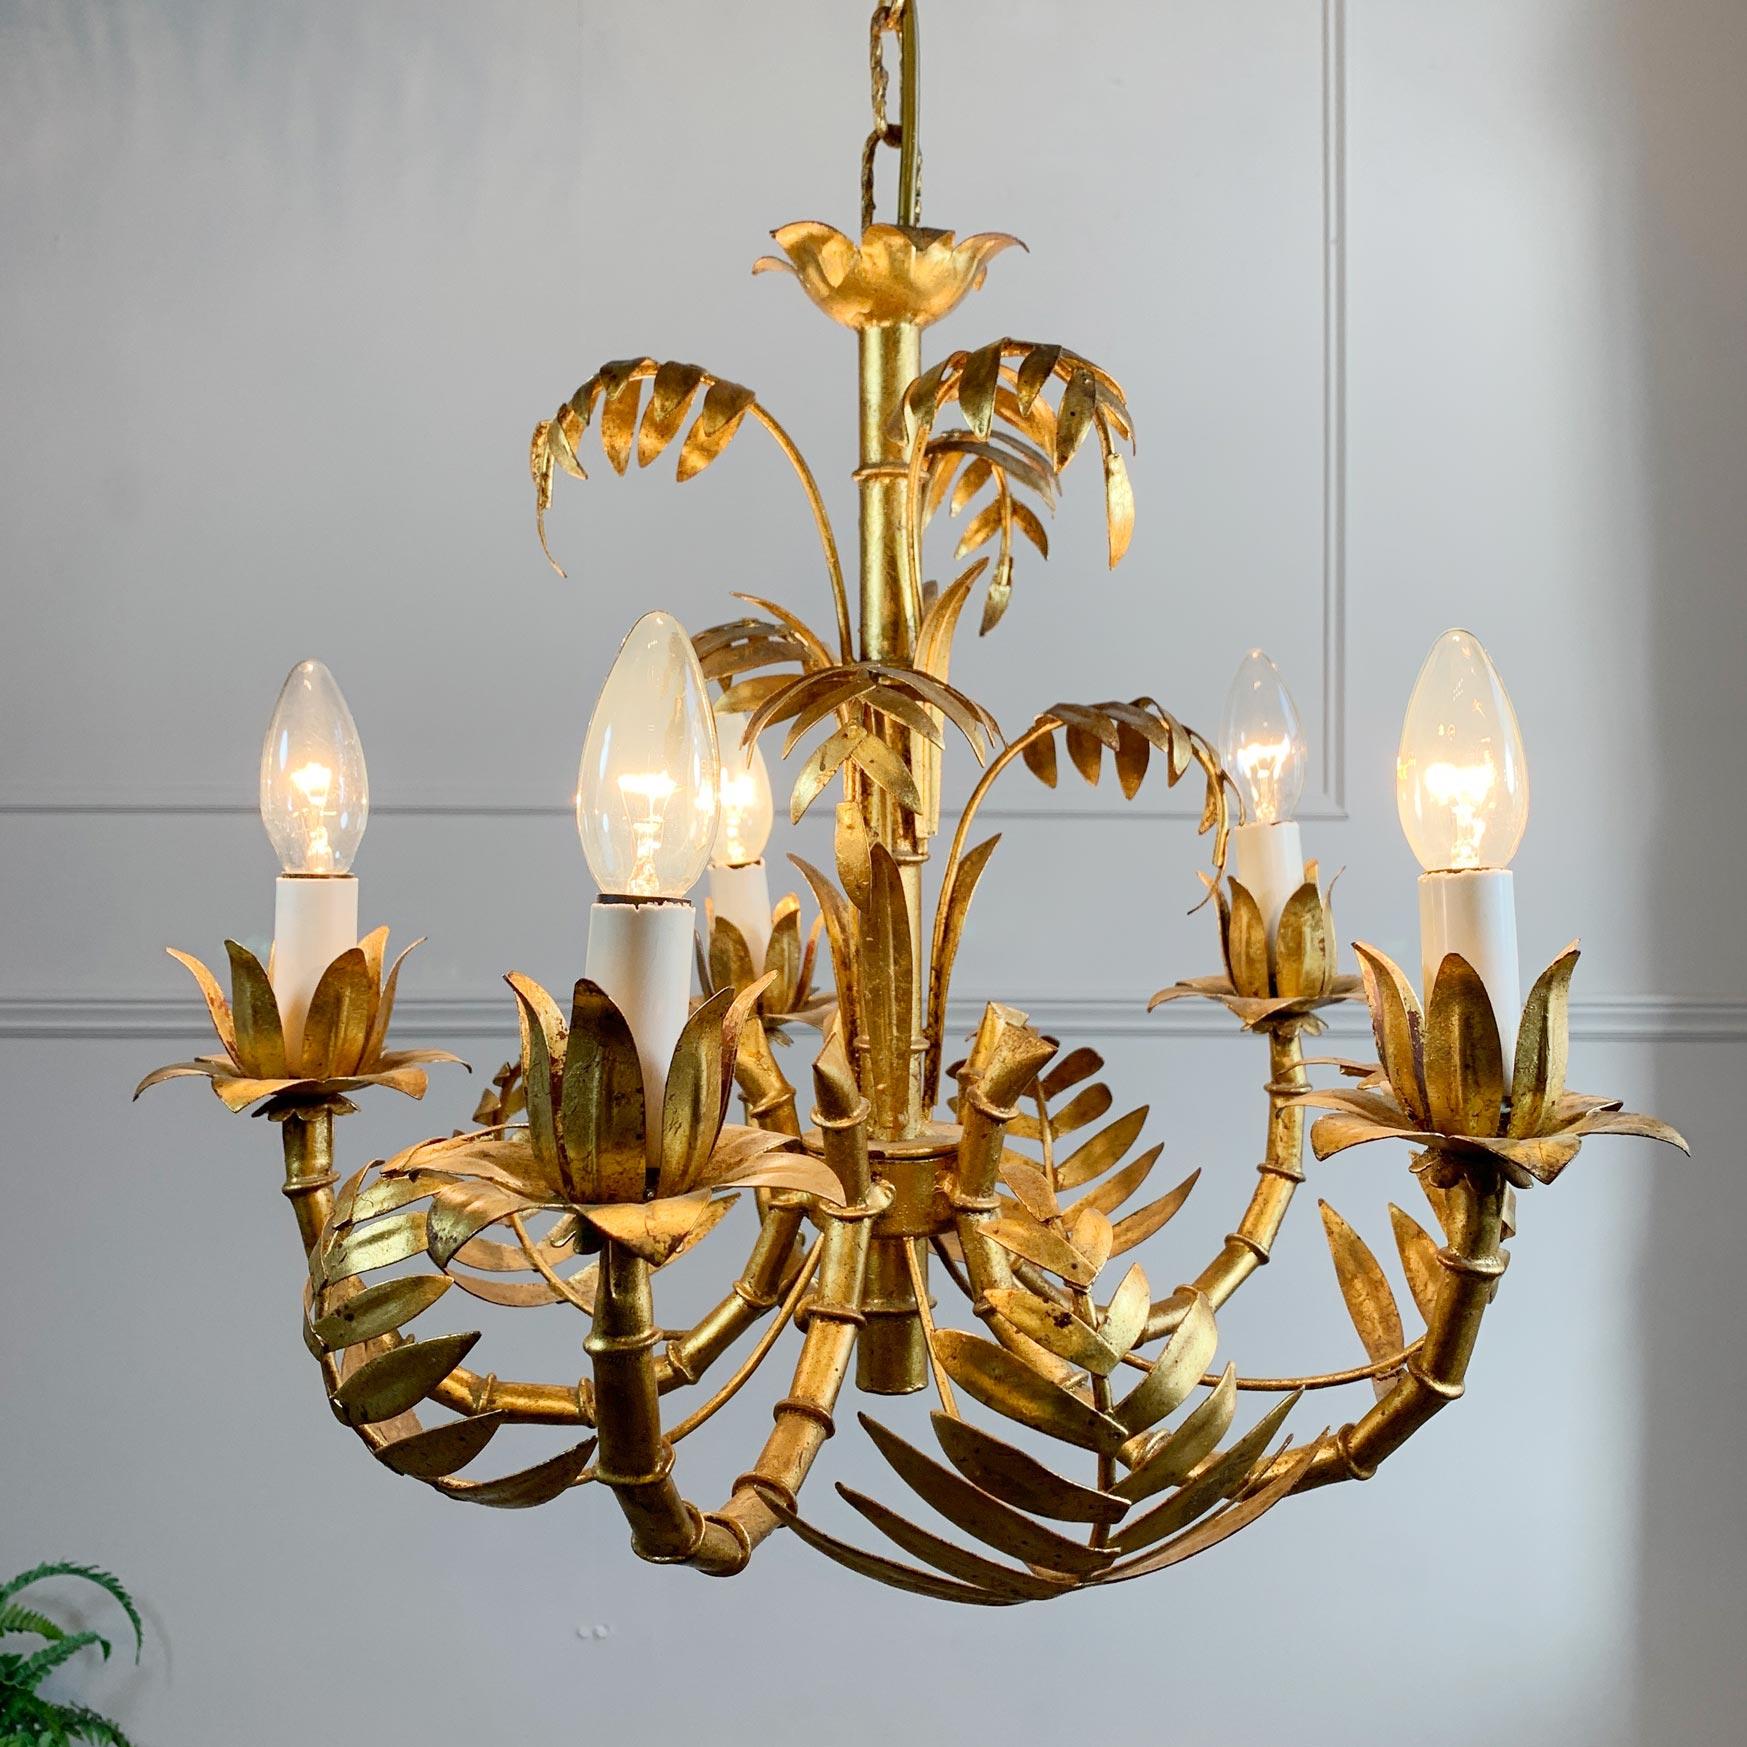 An incredible 5 arm gilt faux bamboo chandelier, Italian dating to the 1970's. The arms designed as bamboo, surrounded by leaves and foliage, the entire light finished in gilt leaf.

This chandelier is in stunning vintage condition.

Measures: